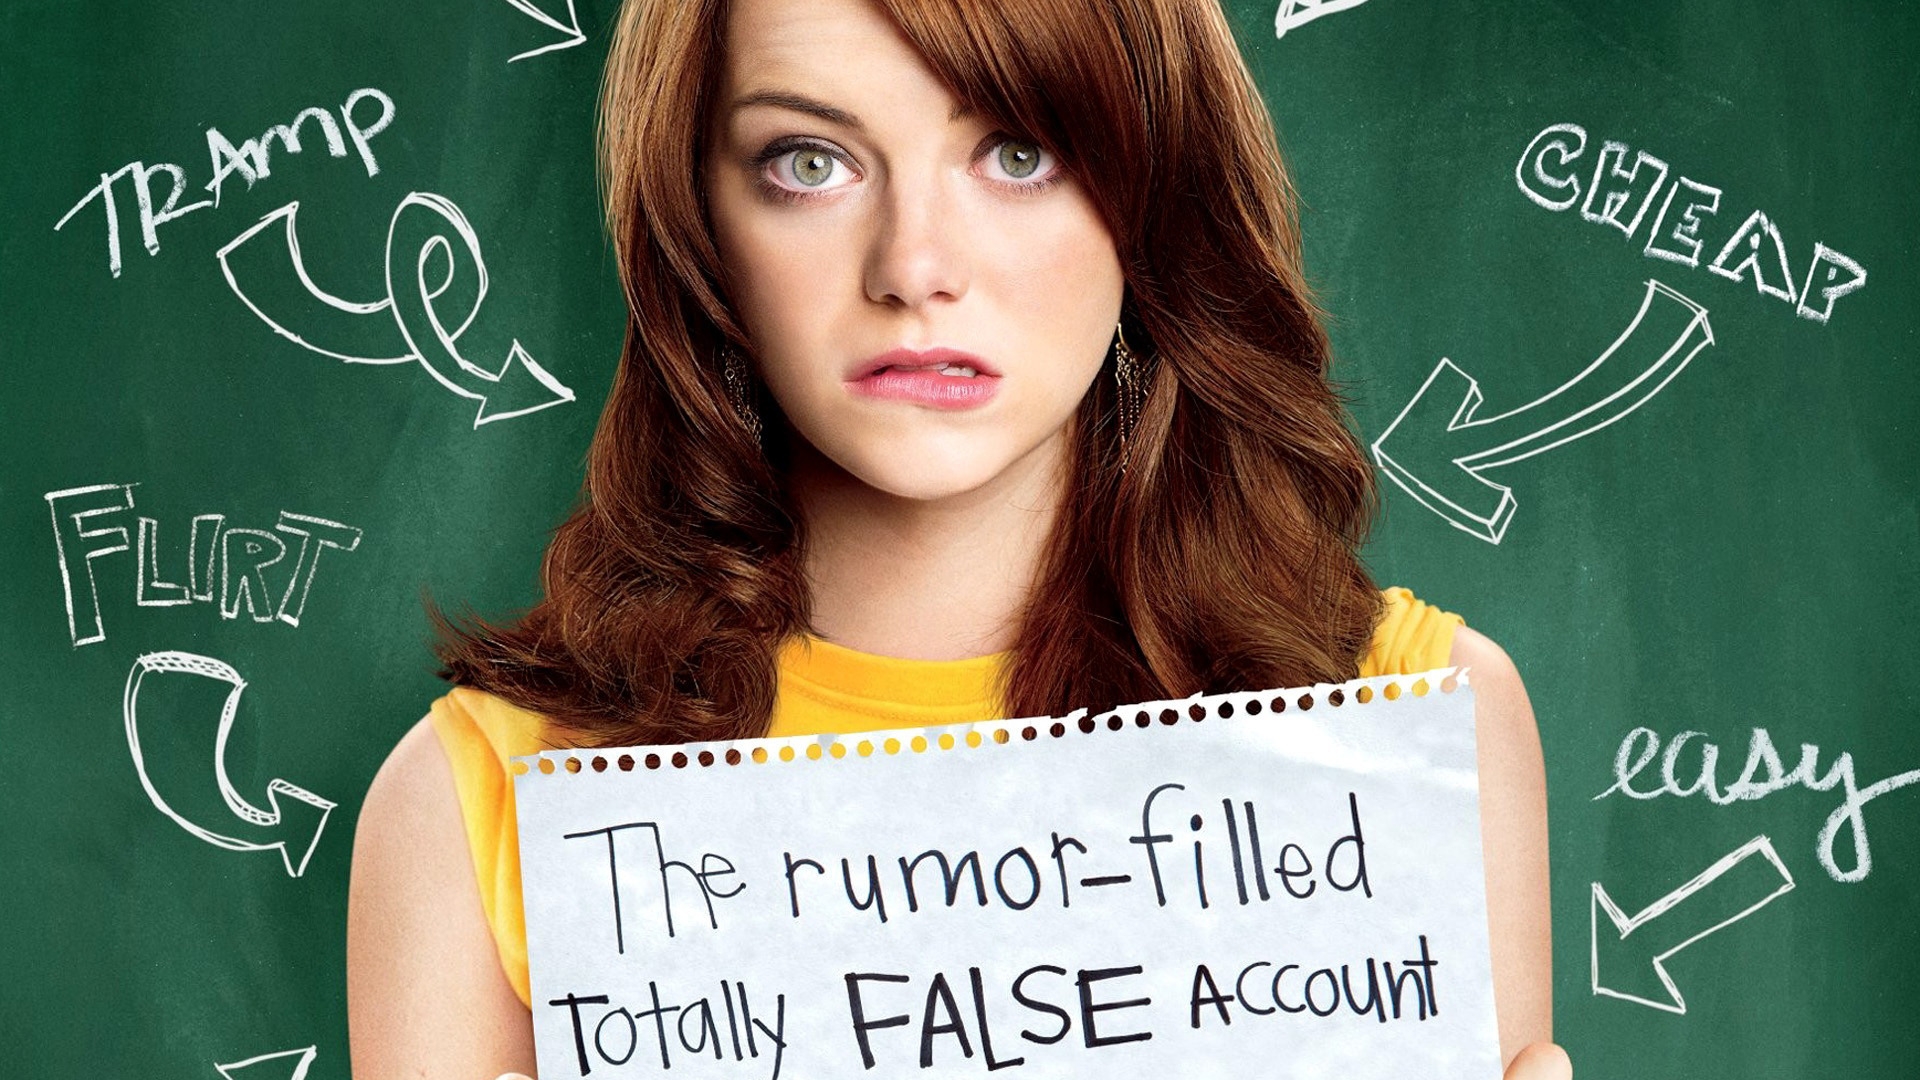 Easy A for 1920 x 1080 HDTV 1080p resolution